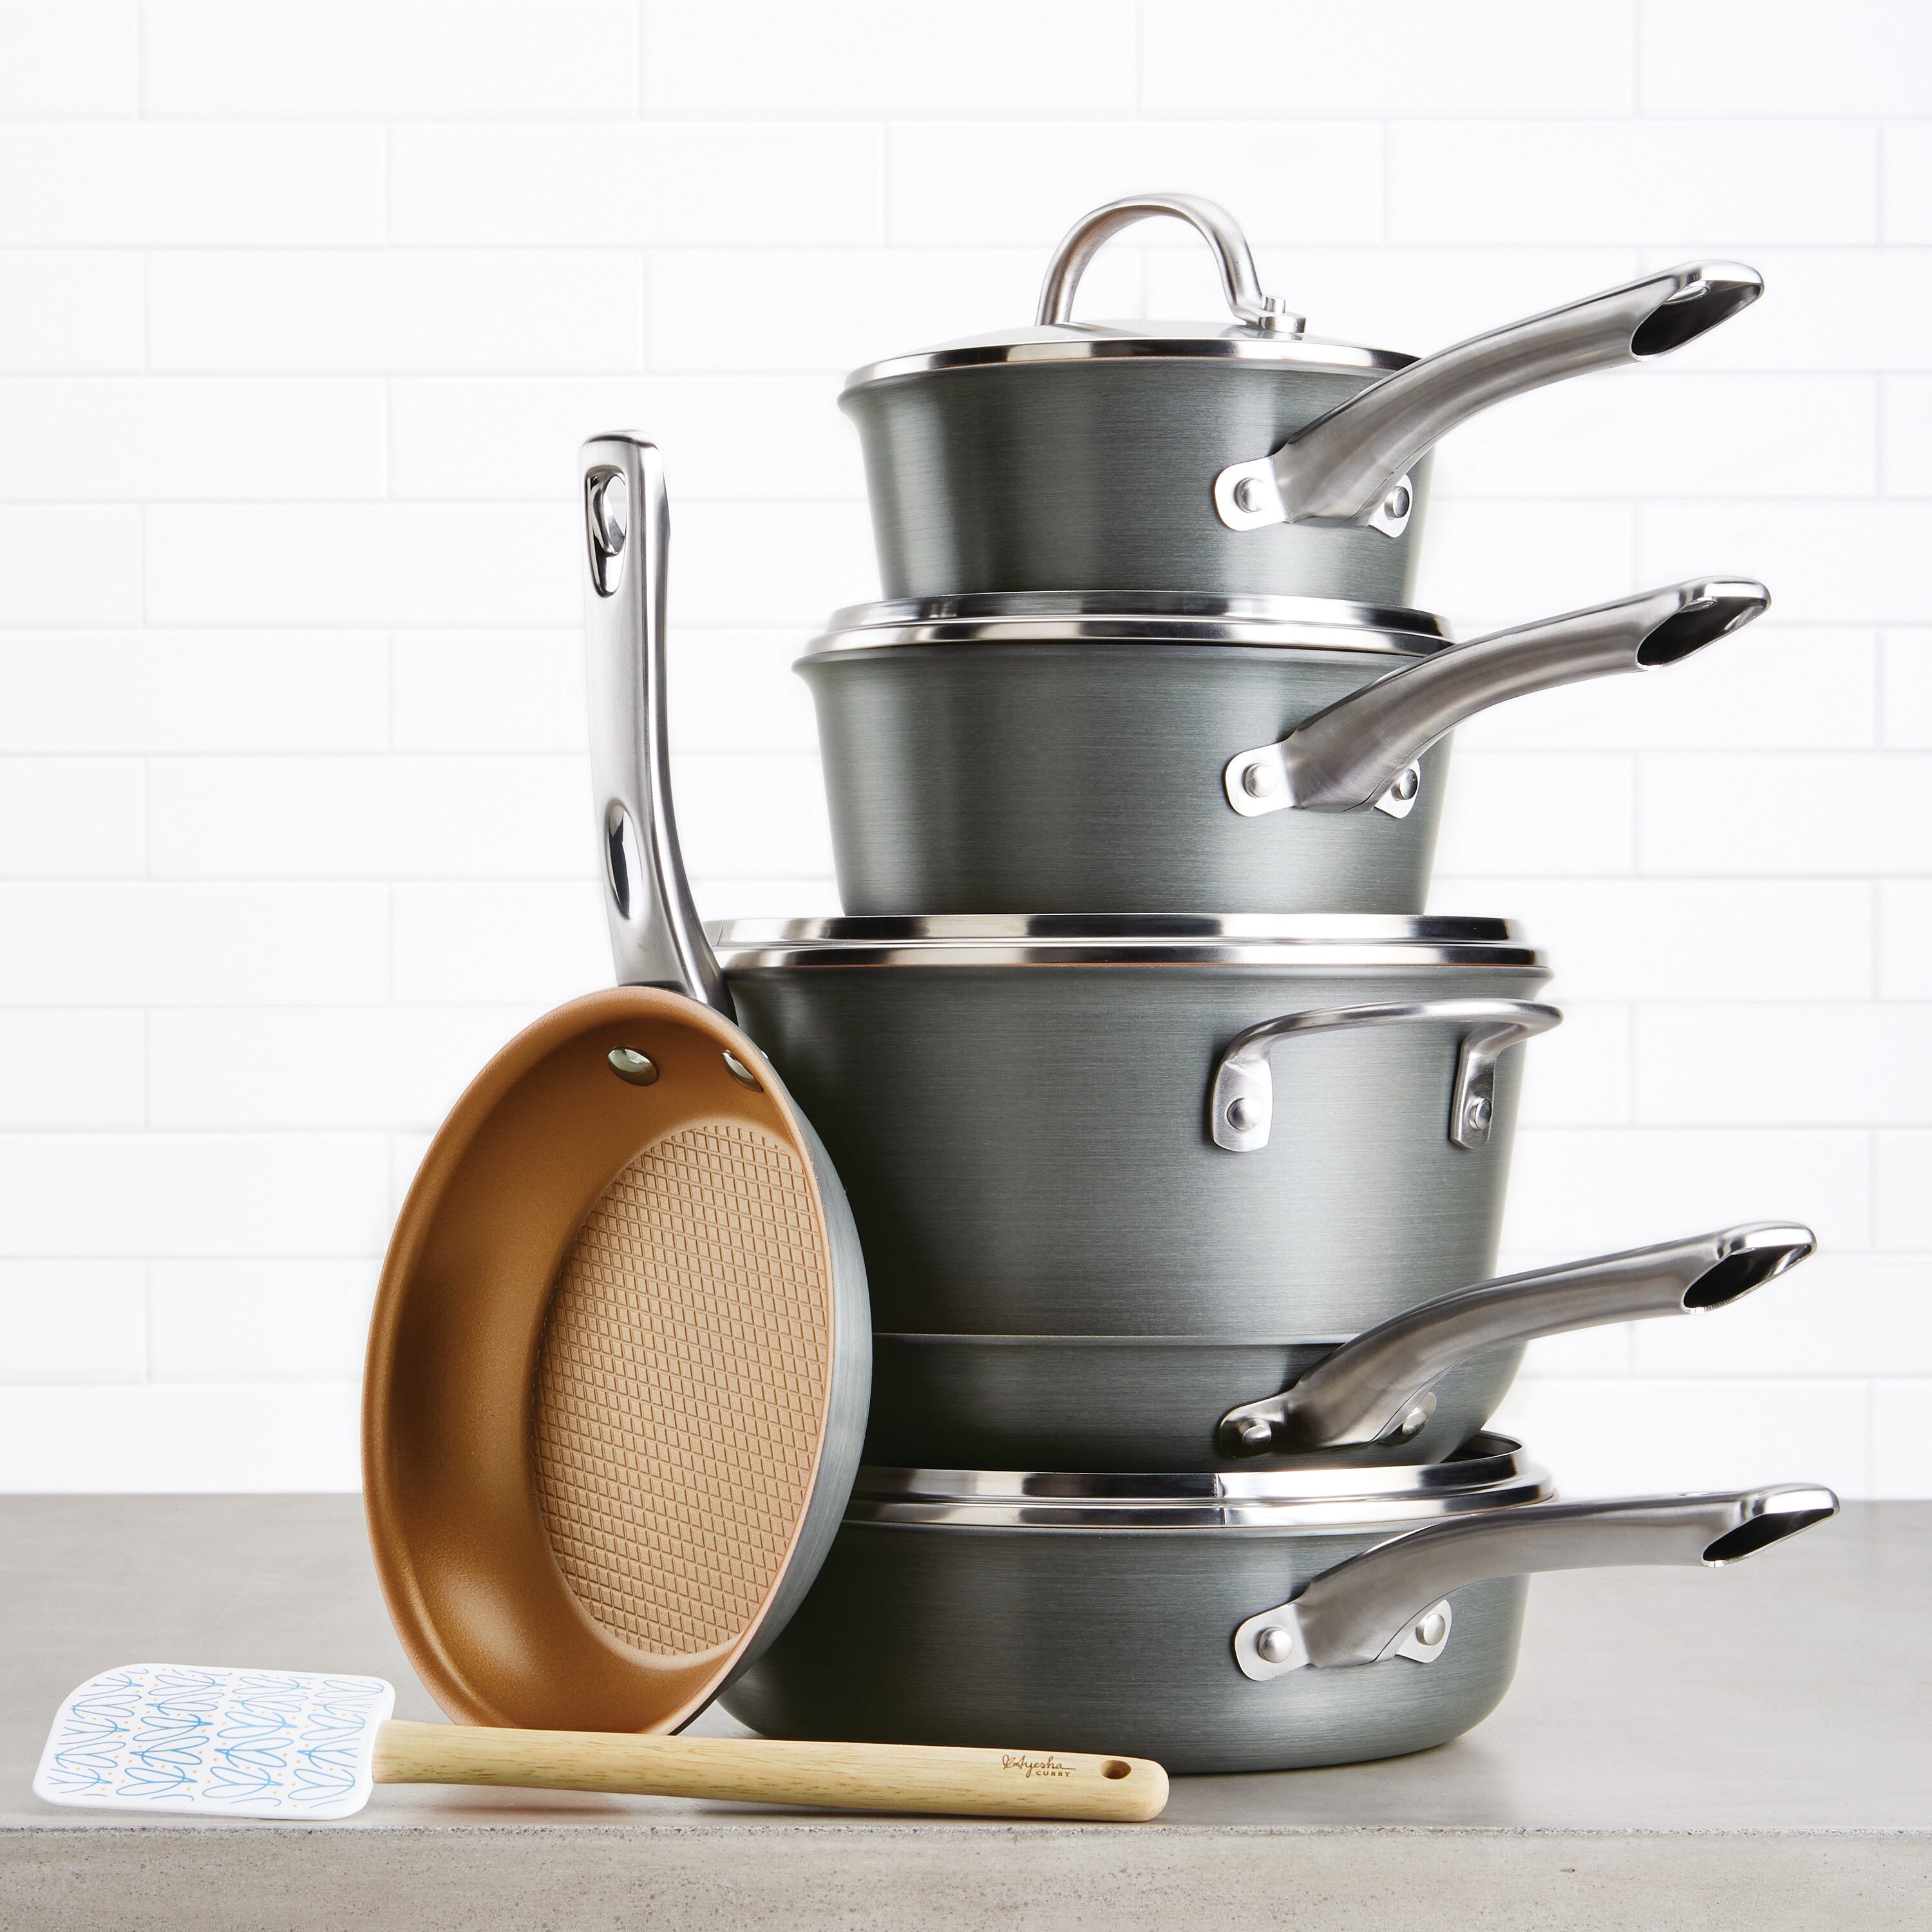 Ayesha Curry's 11-piece cookware set is available at Target